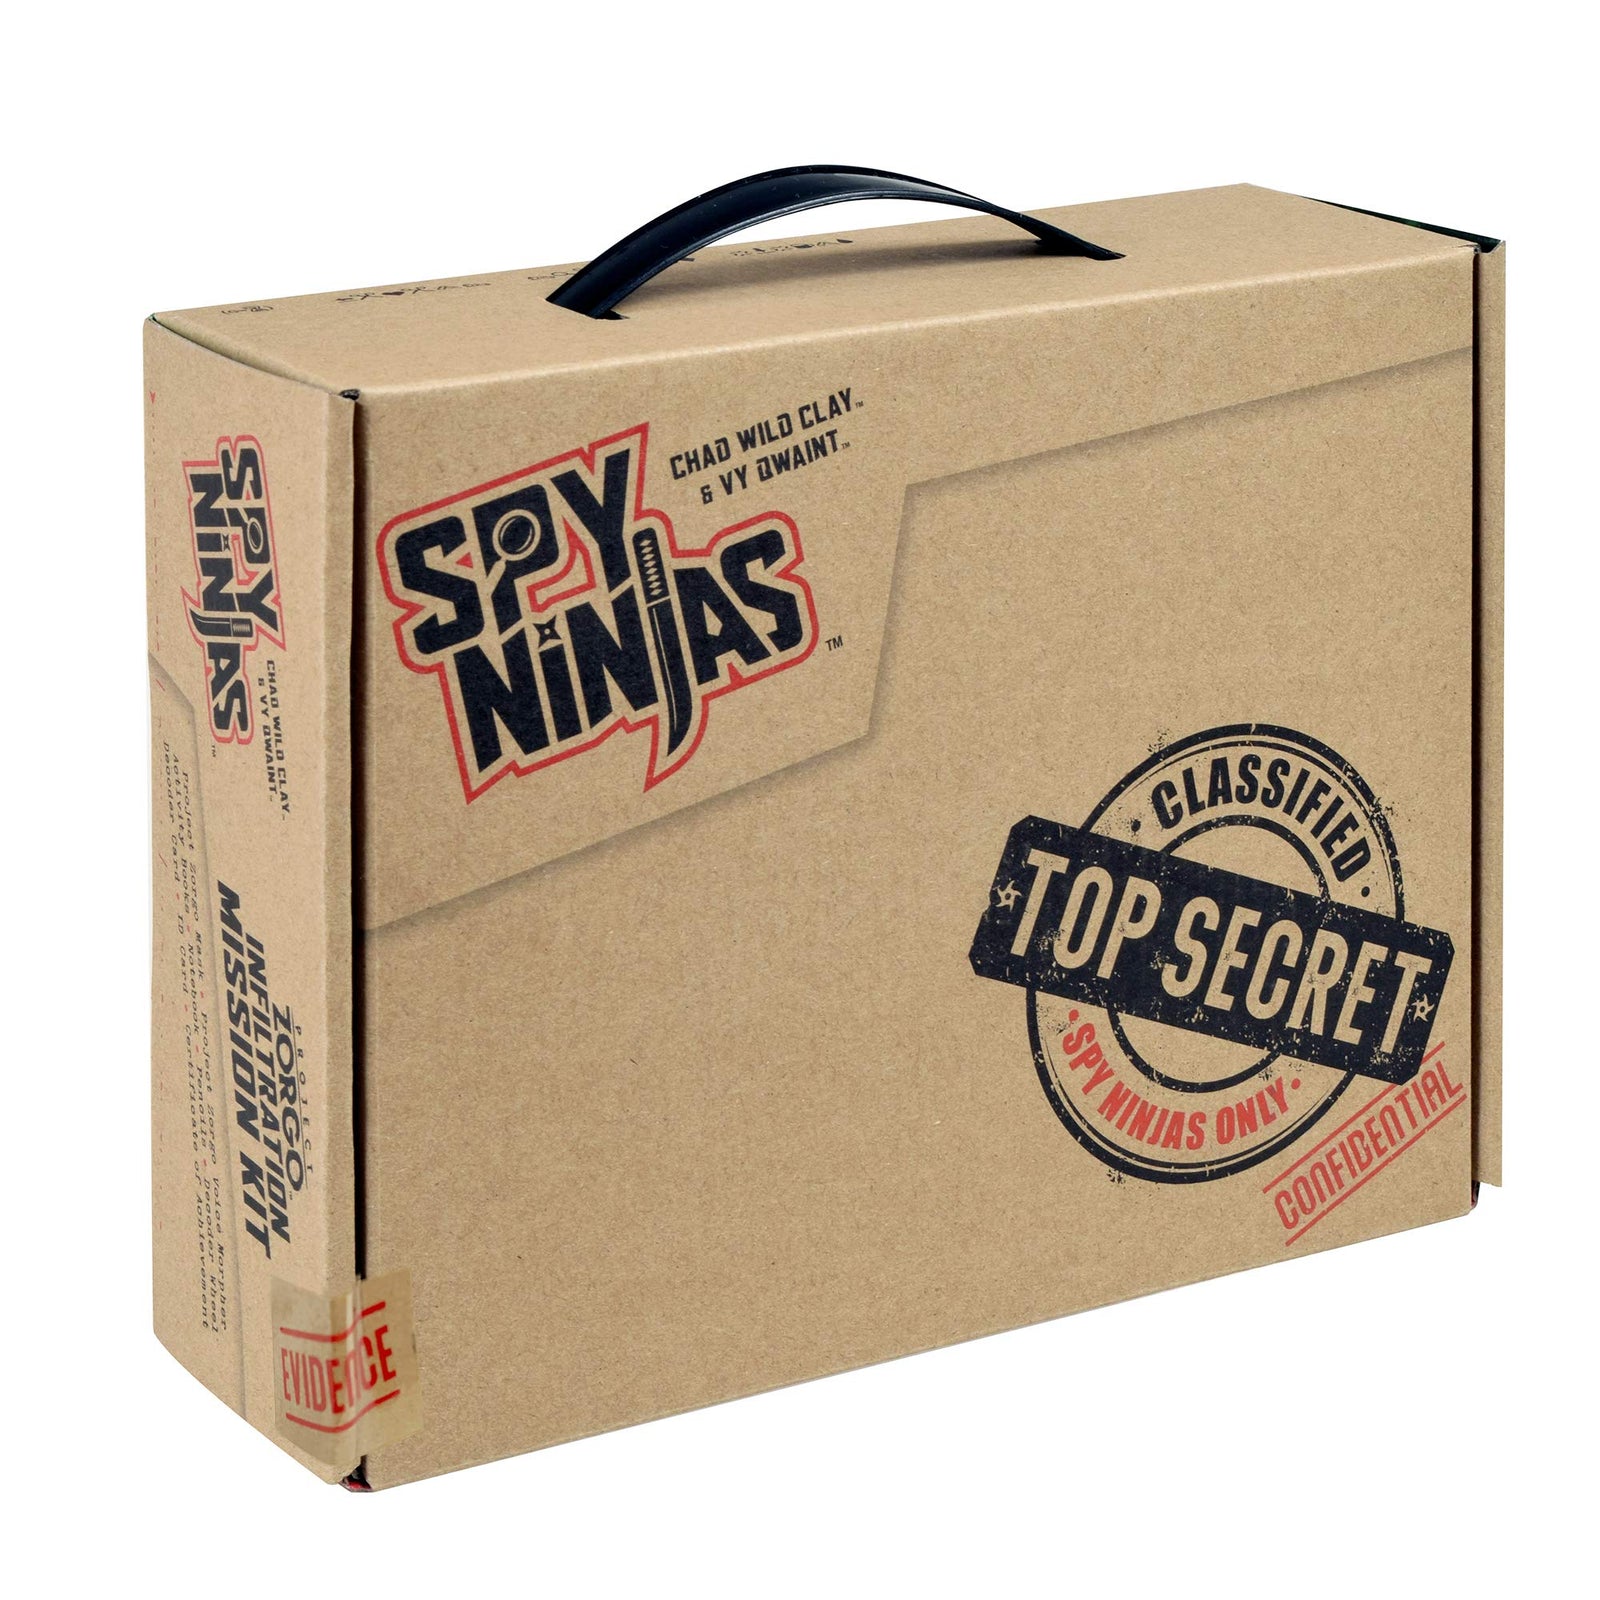 Spy Ninjas Project Zorgo Infiltration Mission Kit from Vy Qwaint and Chad Wild Clay